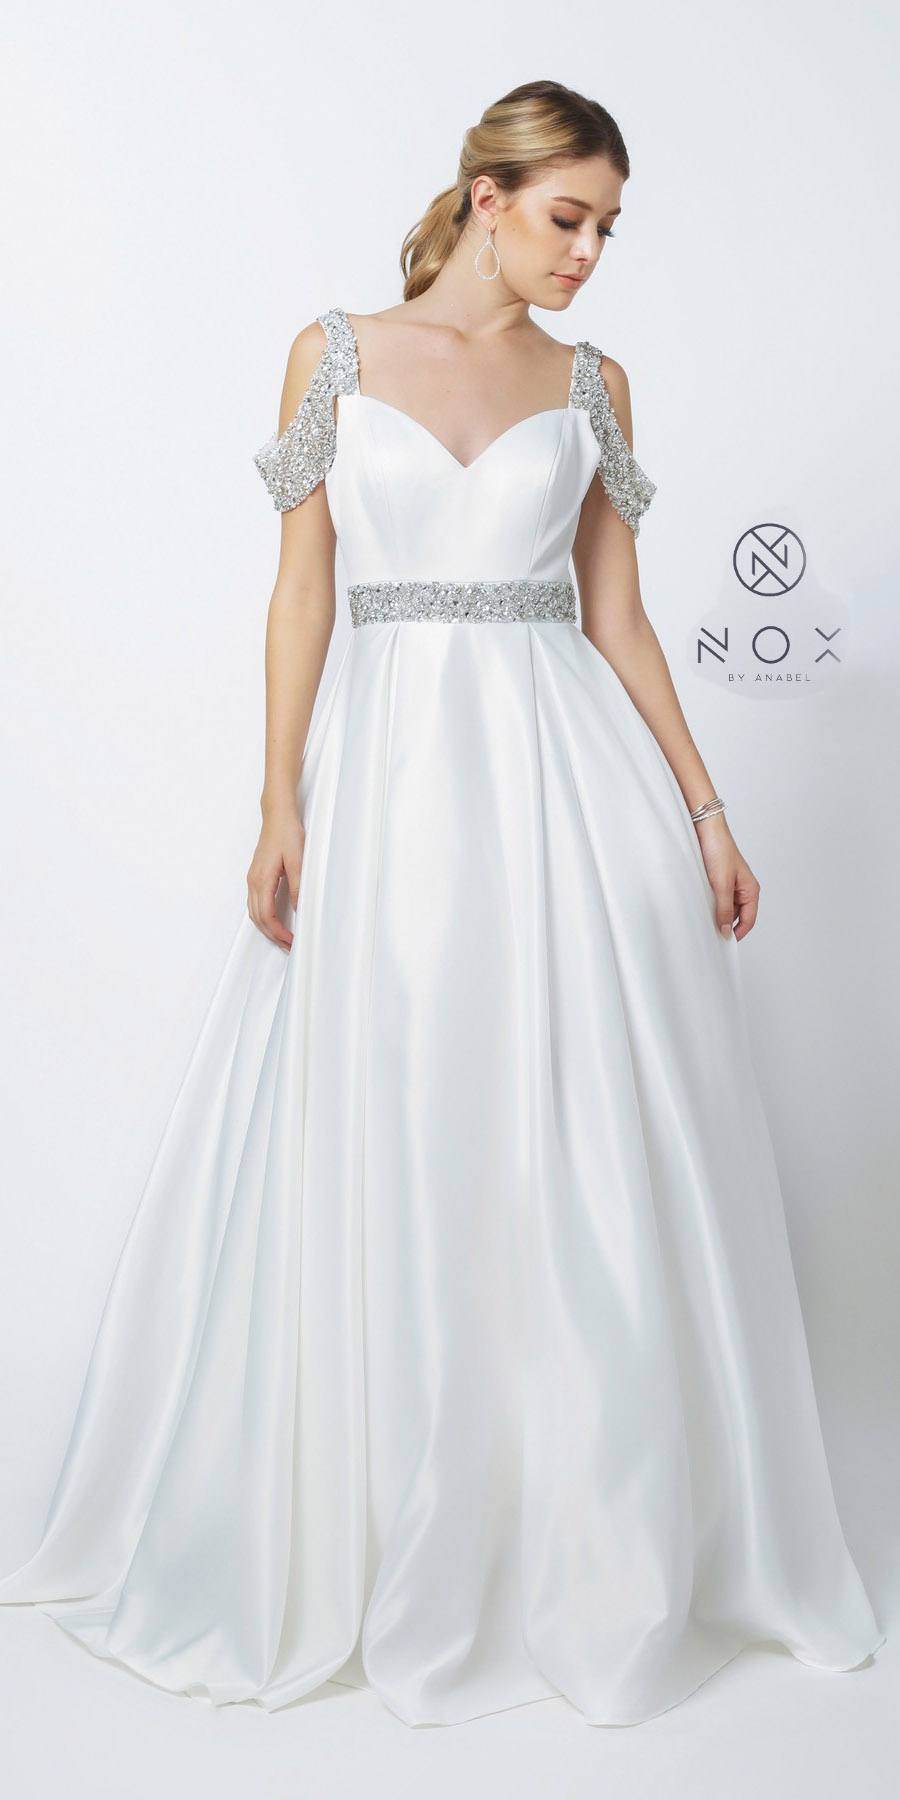 Nox Anabel R224W Long Satin A Line Ballgown Pockets Off the shoulder Dress Pageant prom Bridal Gown sweetheart neckline with beaded embellished cold shoulders strap and waistband. The open back has a zipper closure while the skirt reveals a pleated detail and flows into a full length A-line silhouette 